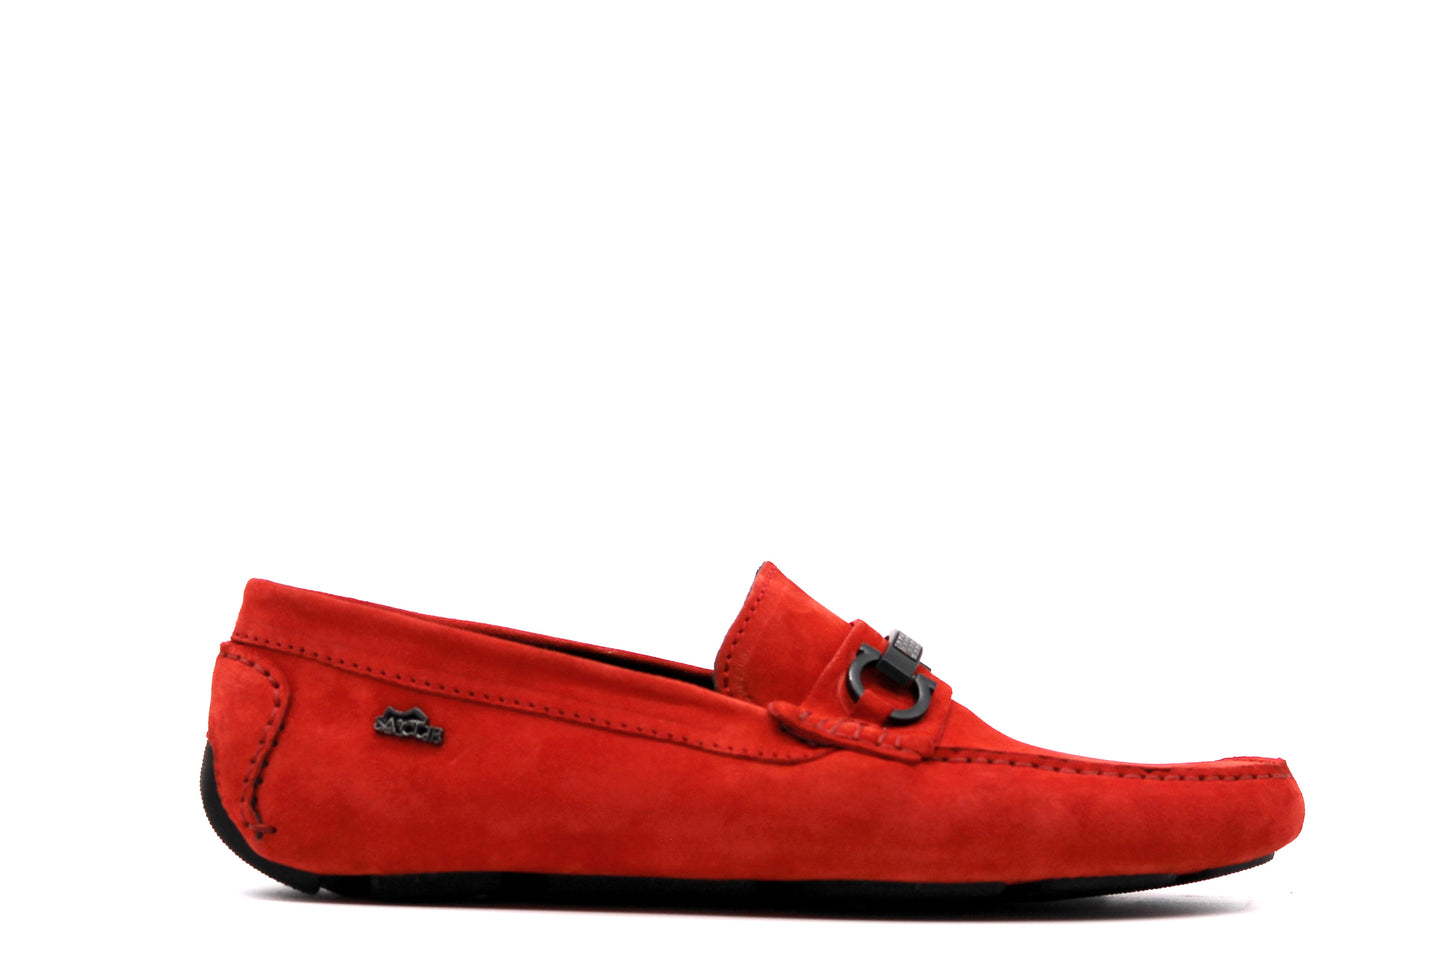 Adelie Suede Driving Shoes